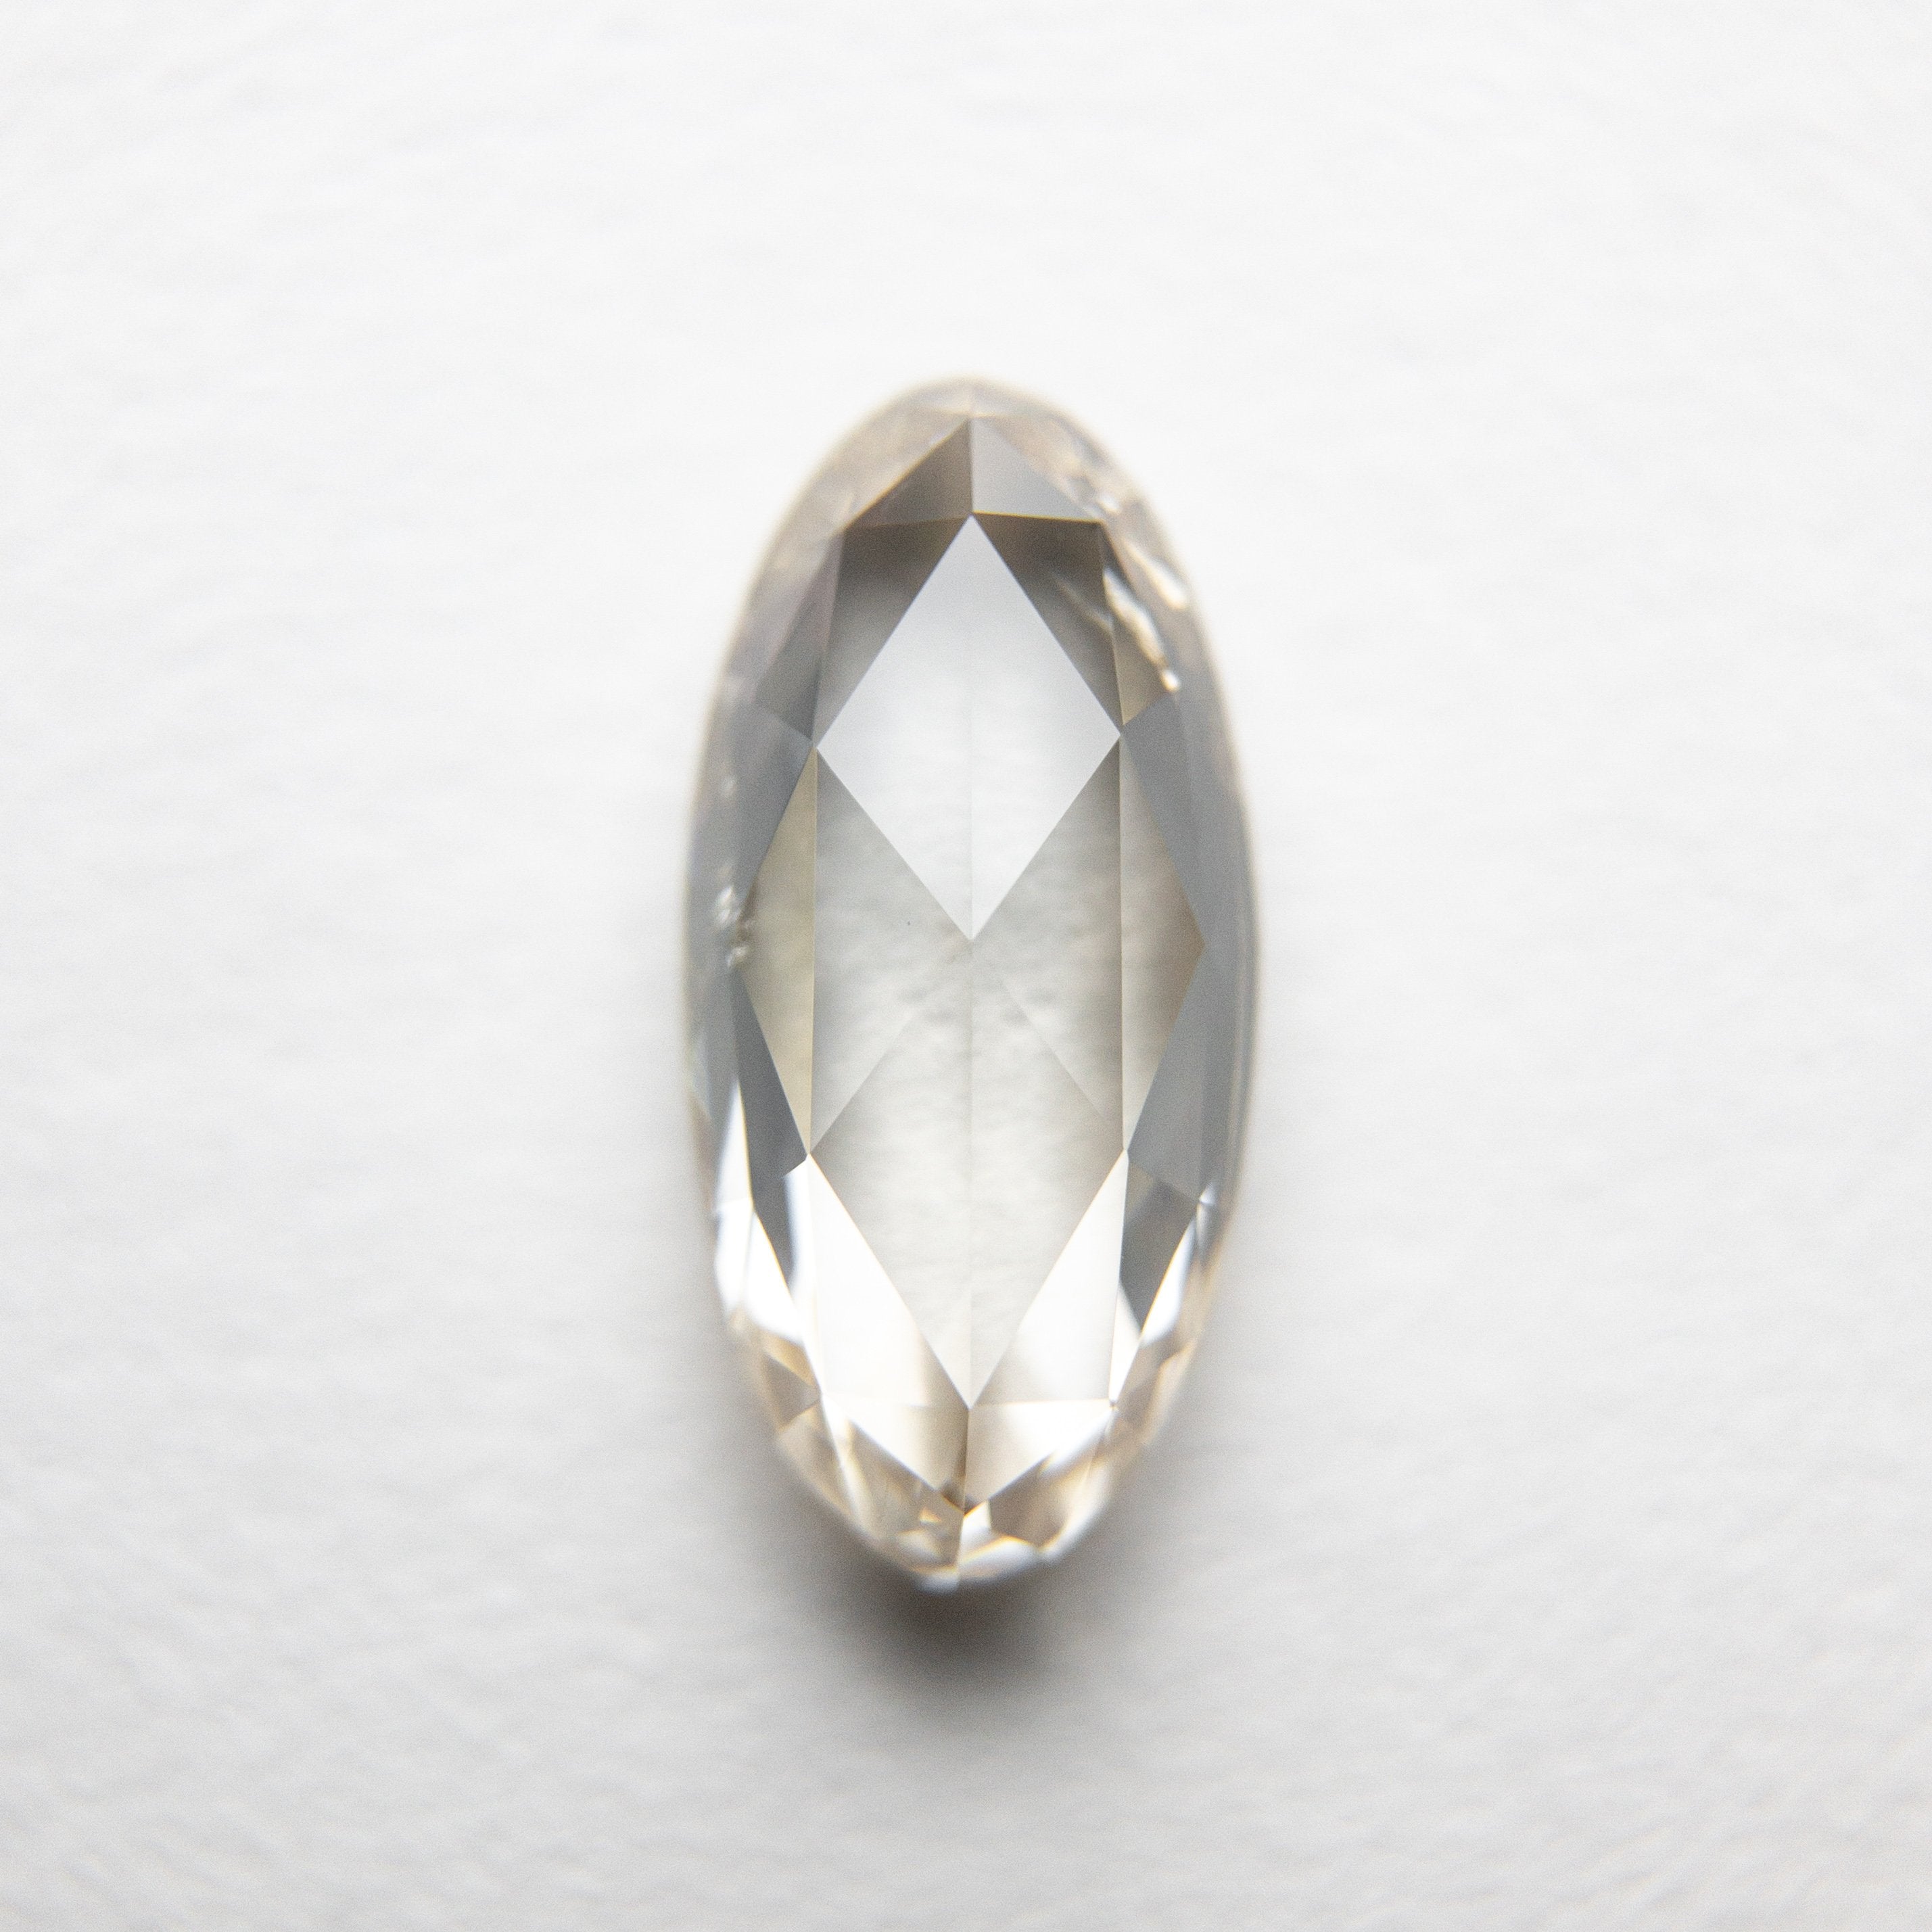 1.23ct 9.65x 4.71x2.86mm Oval Rosecut 18369-31 HOLD D1928 2.10.21